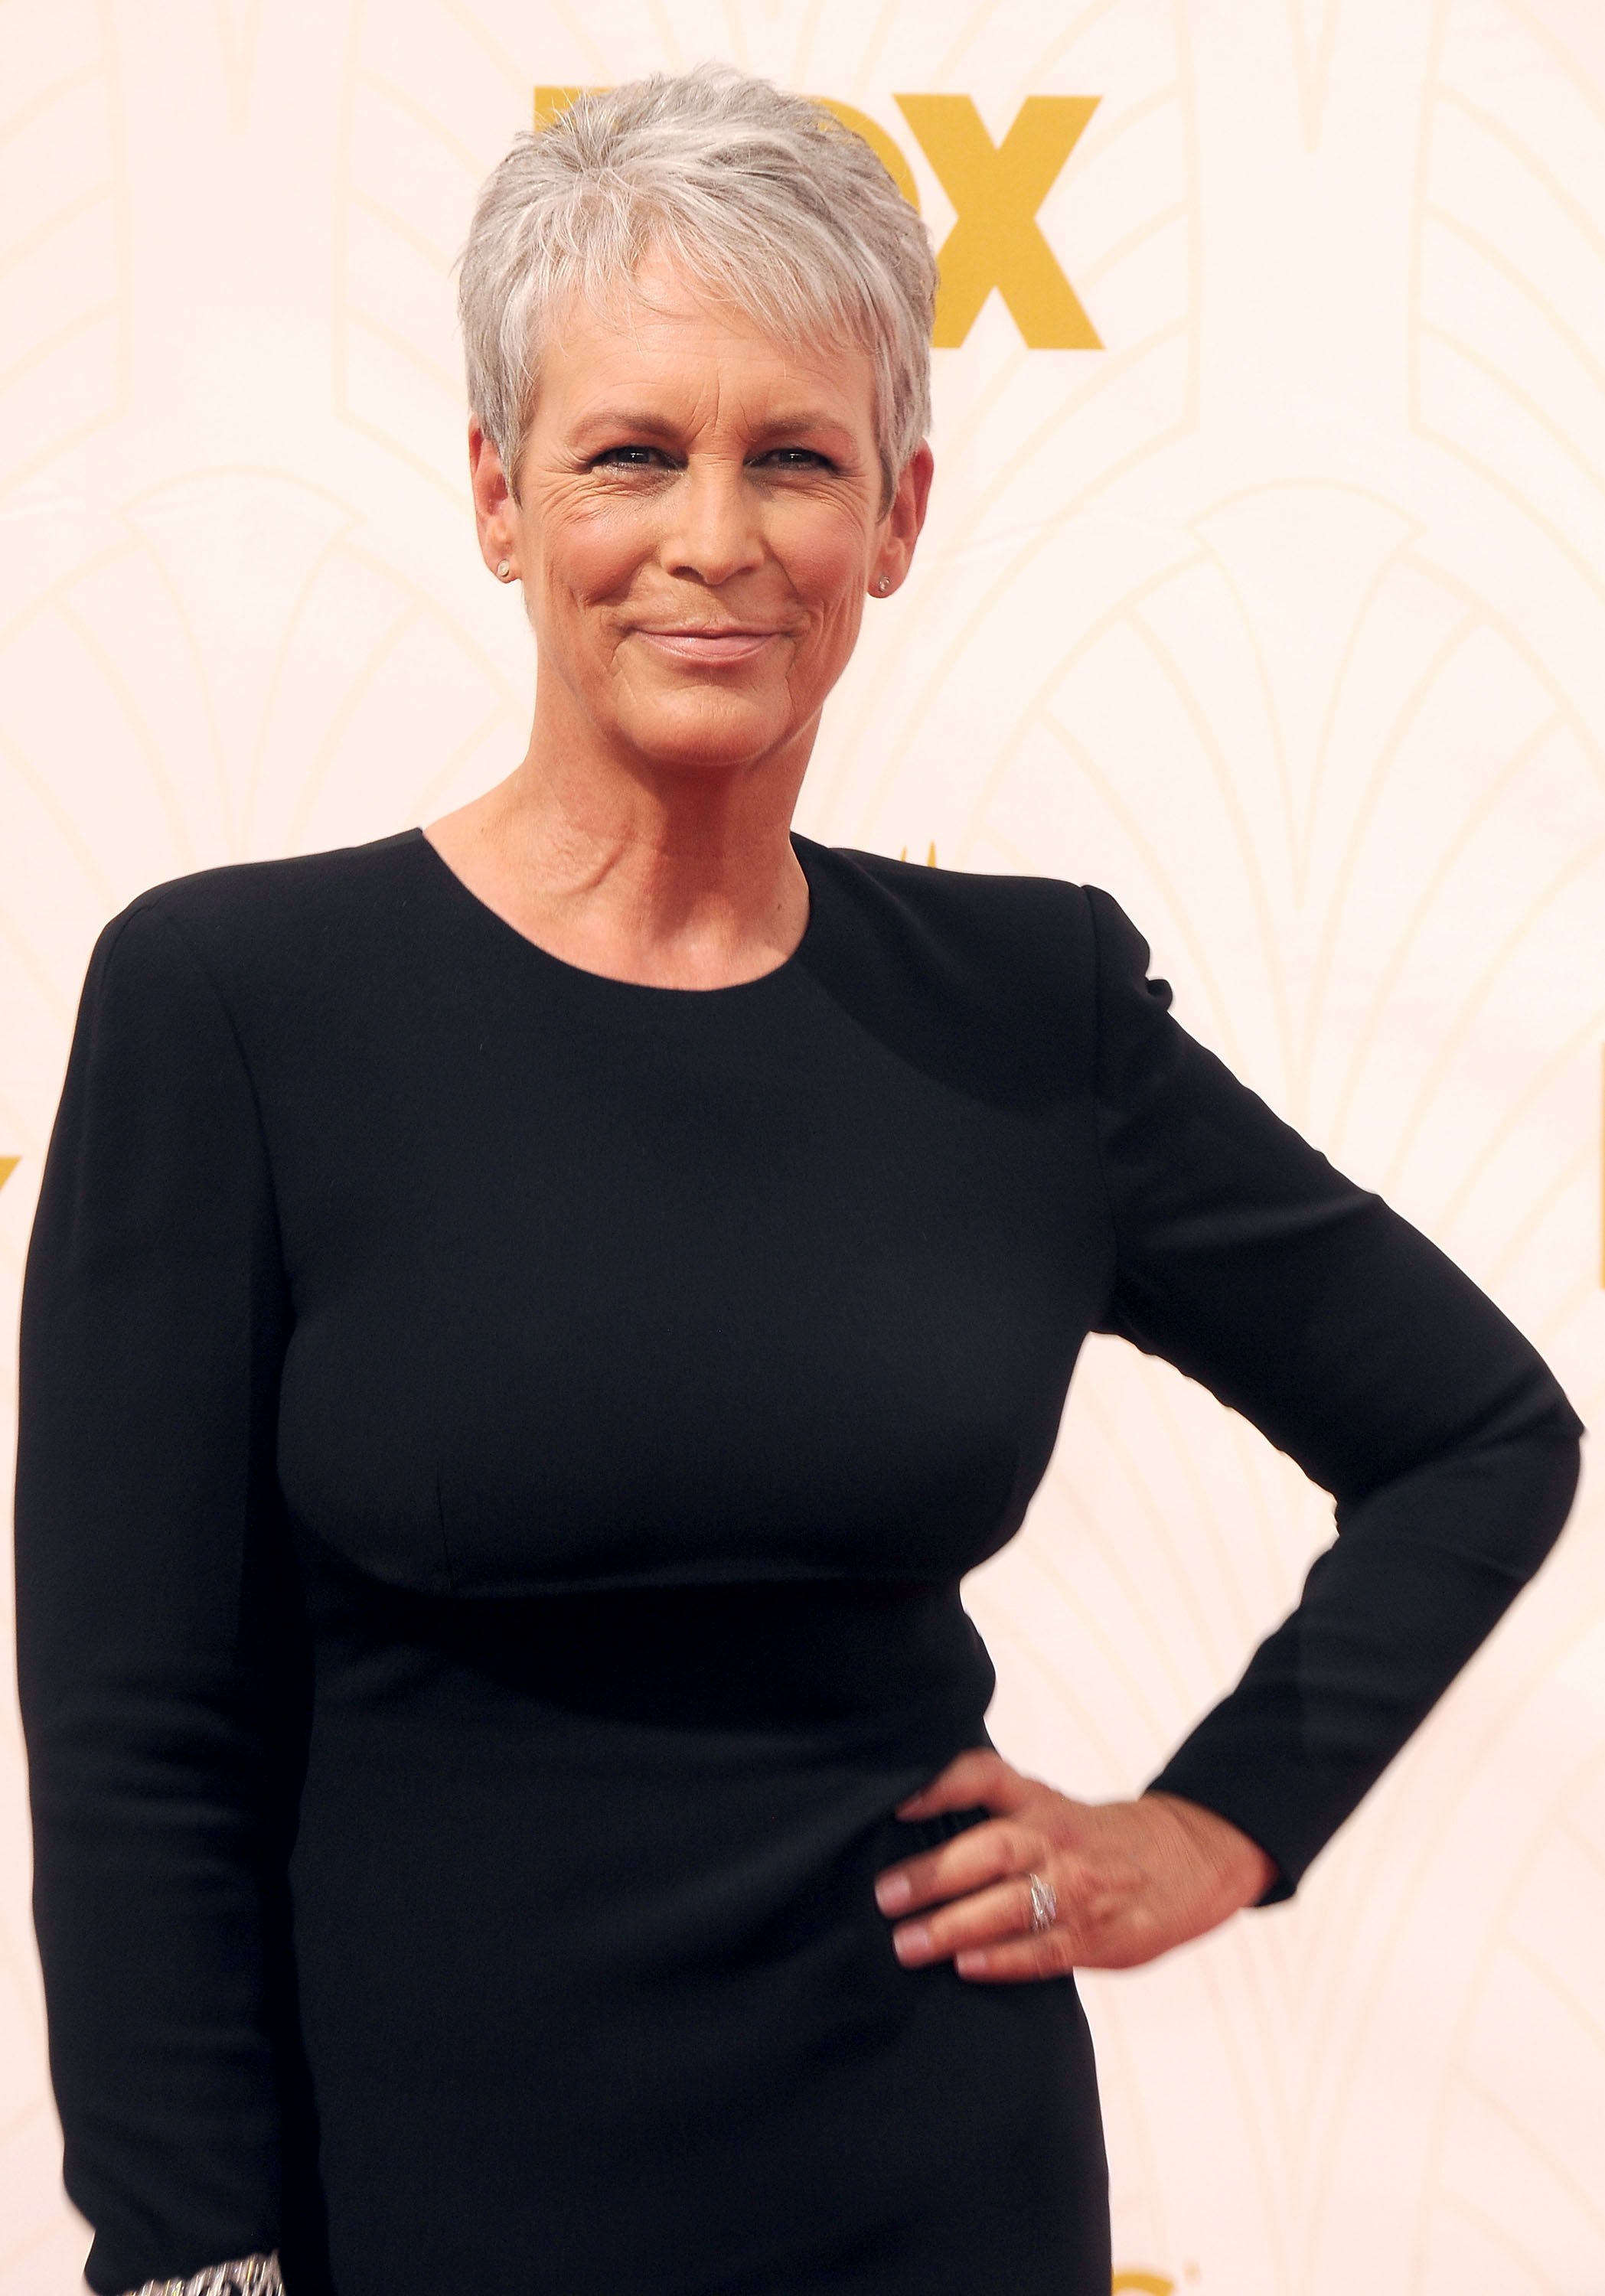 Jamie Lee Curtis, actress | Photo: Getty Images